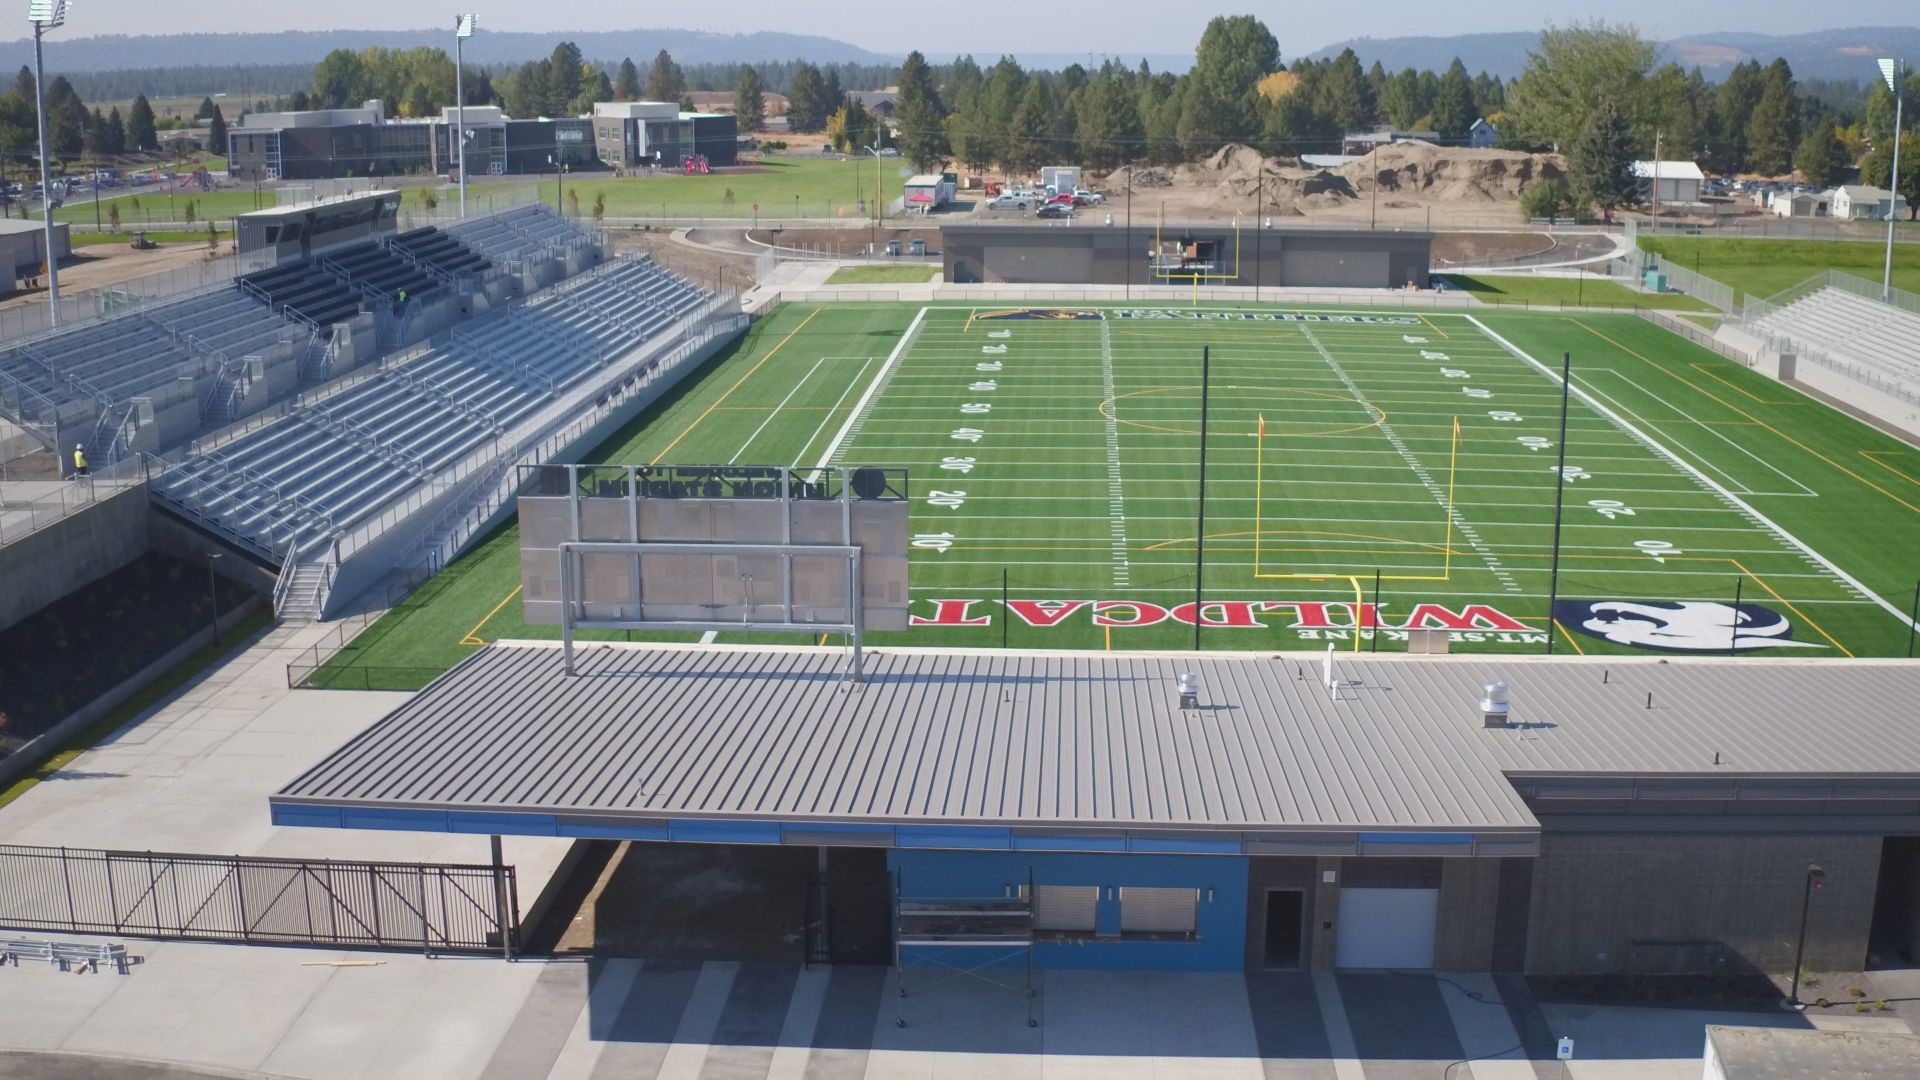 The new facility means high school football will be played in Mead for the first time in 50 years.